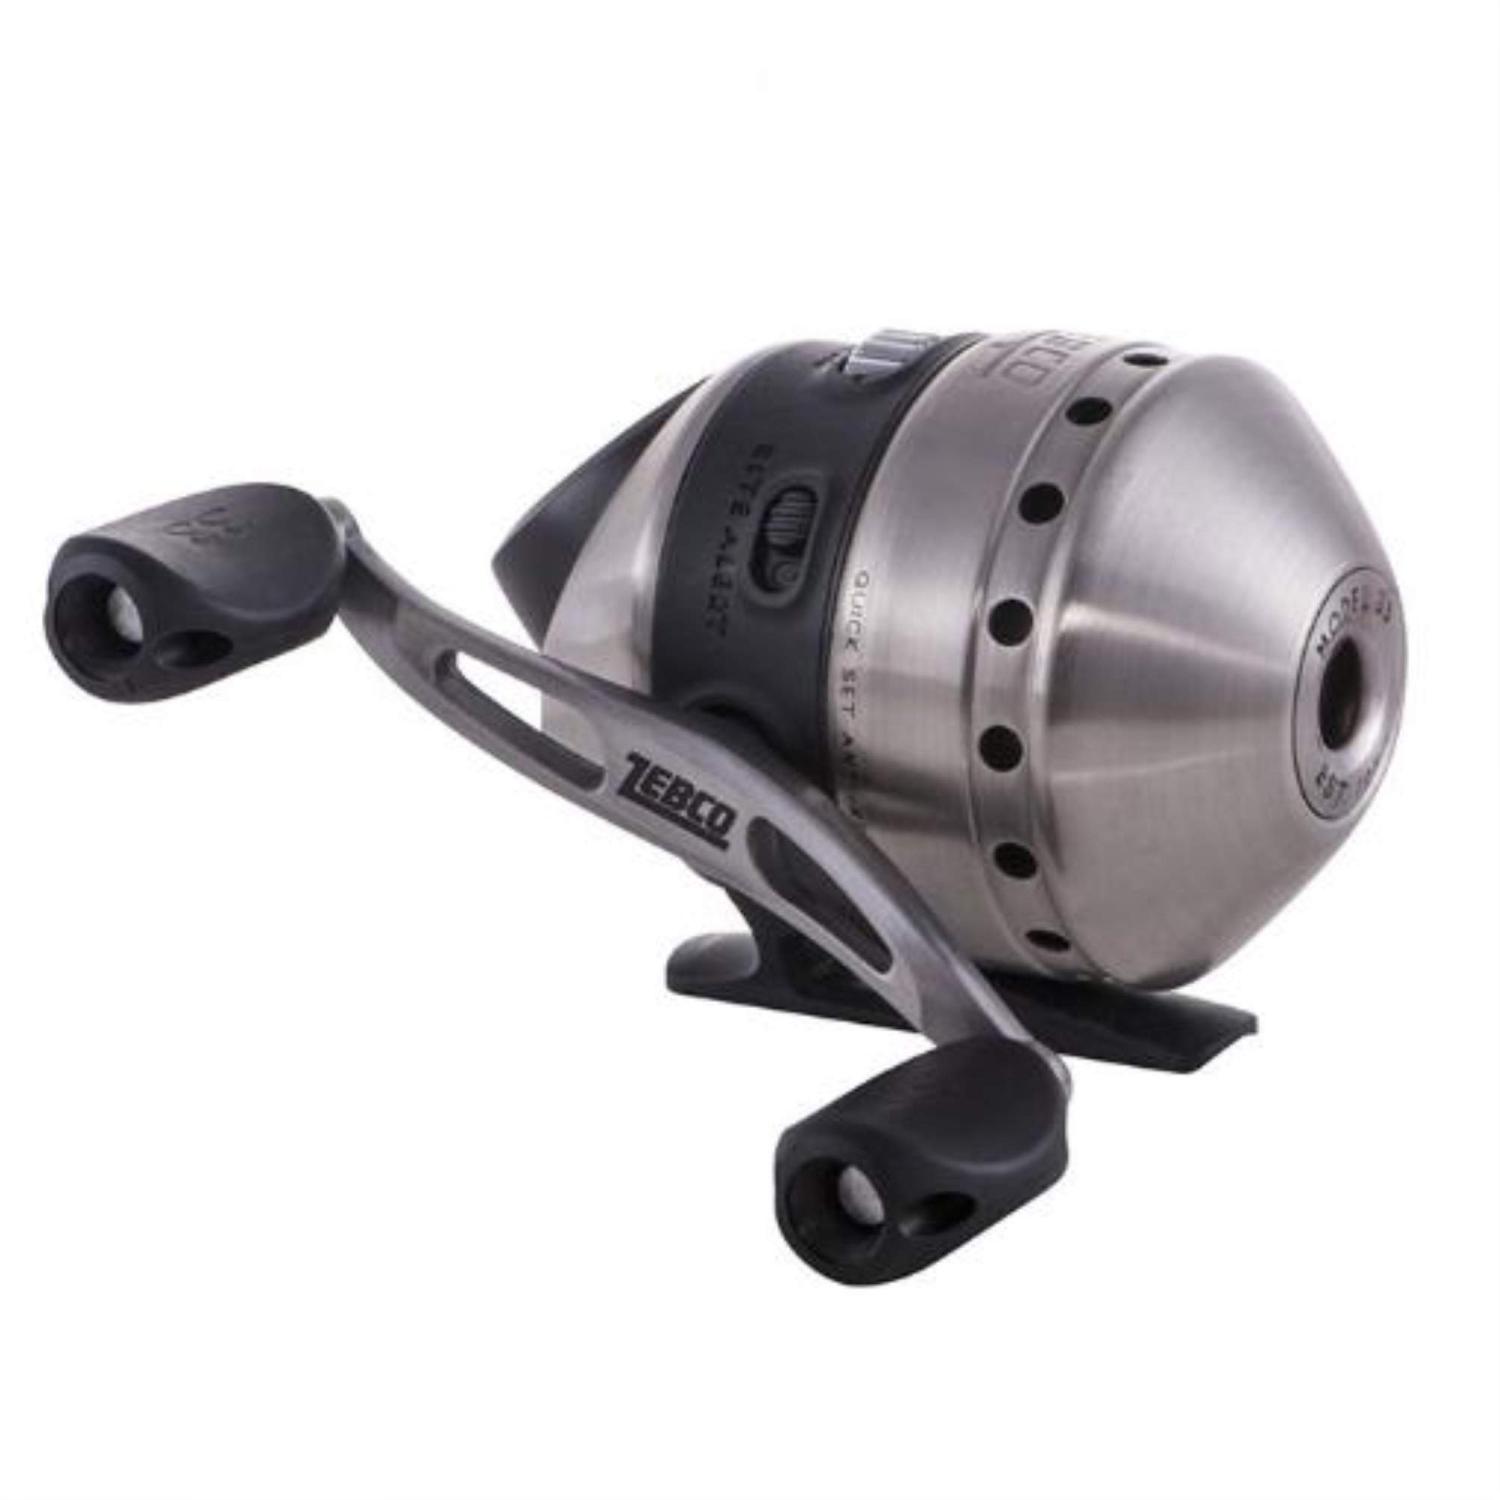 Zebco 33 Spincast Reel and Telescopic Fishing Rod Combo, Extendable  22.5-Inch to 6-Foot E-Glass Fishing Pole, Size 30 Reel, Quickset  Anti-Reverse Fishing Reel with Bite Alert, Silver/Black : :  Sports & Outdoors